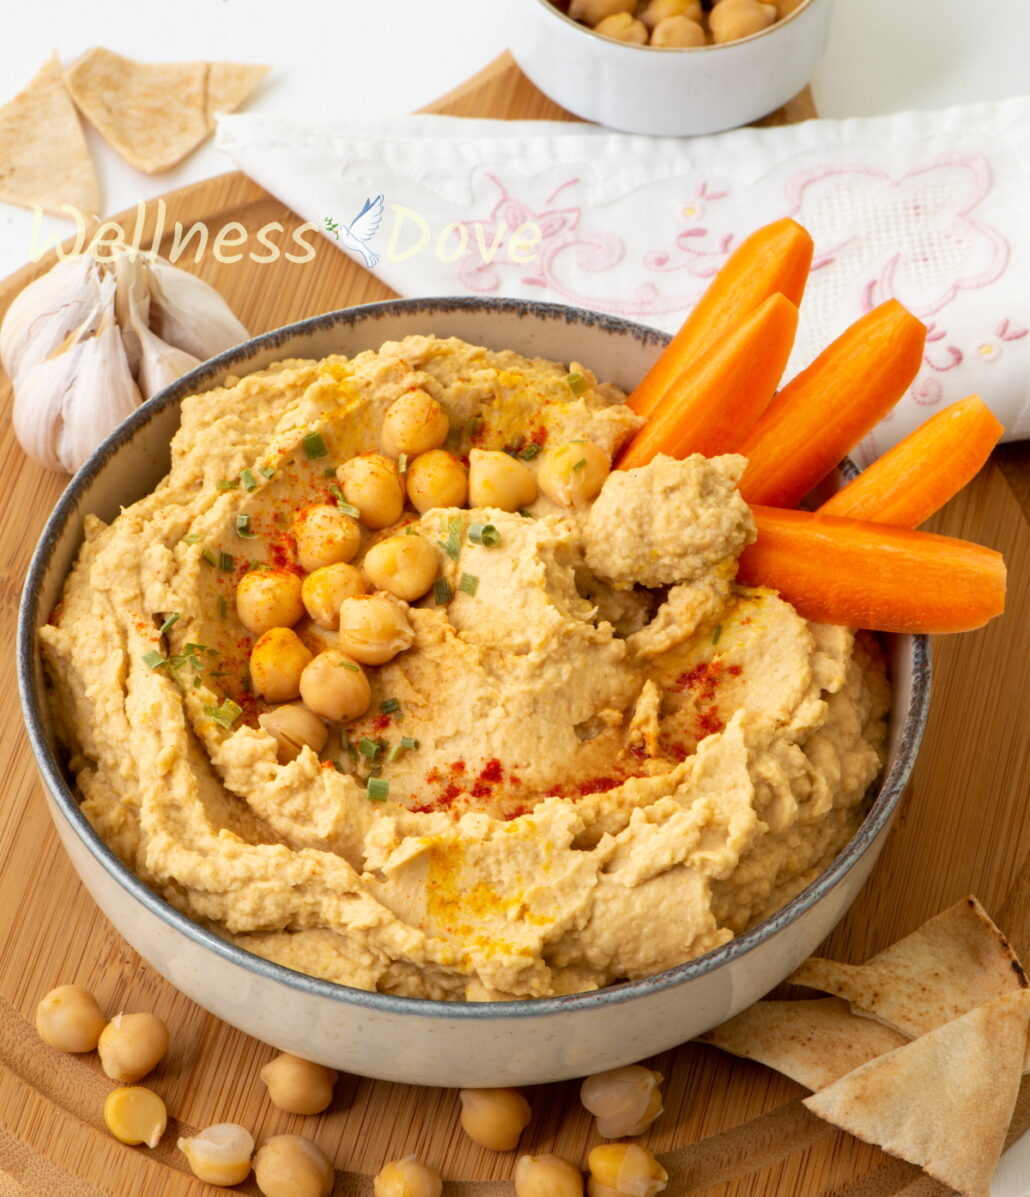 the 5 ingredient oil-free vegan hummus in a bowl on a chopping board with carrot sticked in it